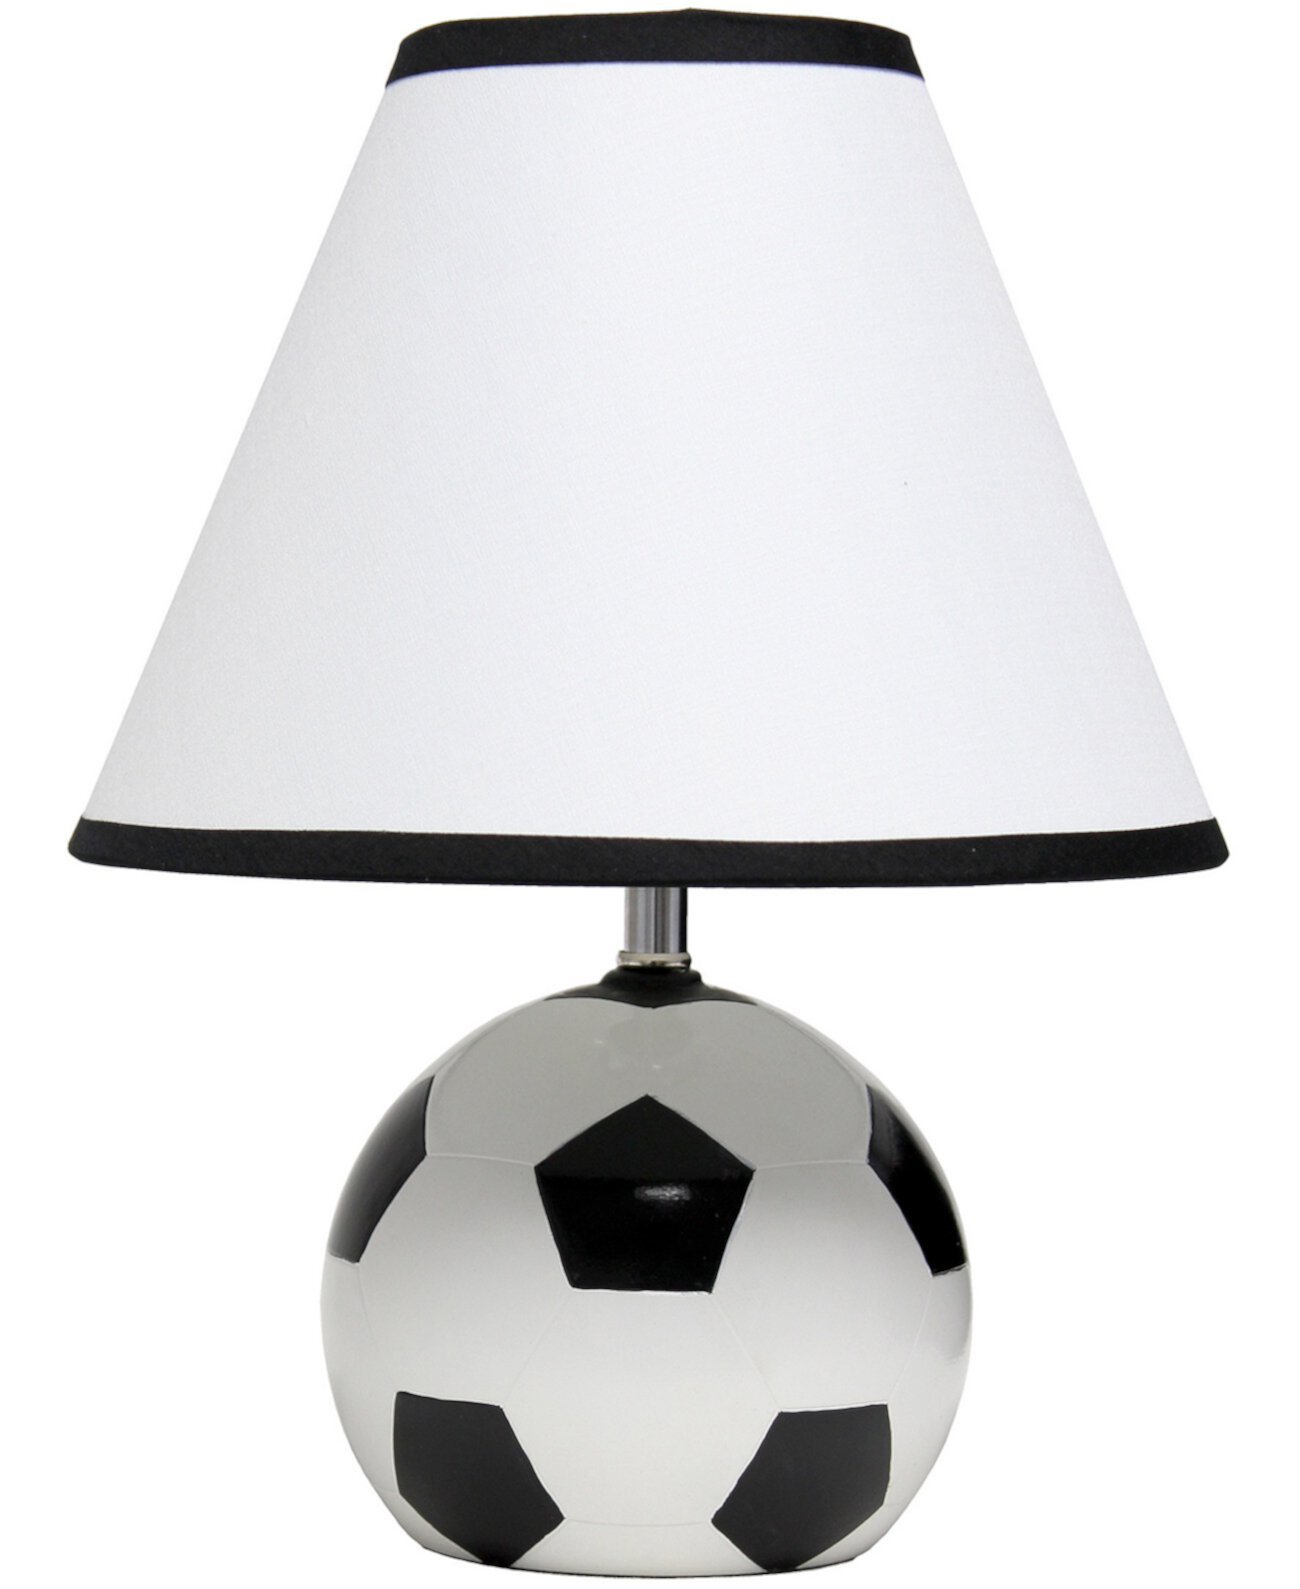 SportsLite 11.5" Tall Athletic Sports Soccer Ball Base Ceramic Bedside Table Desk Lamp with White Empire Fabric Shade Simple Designs